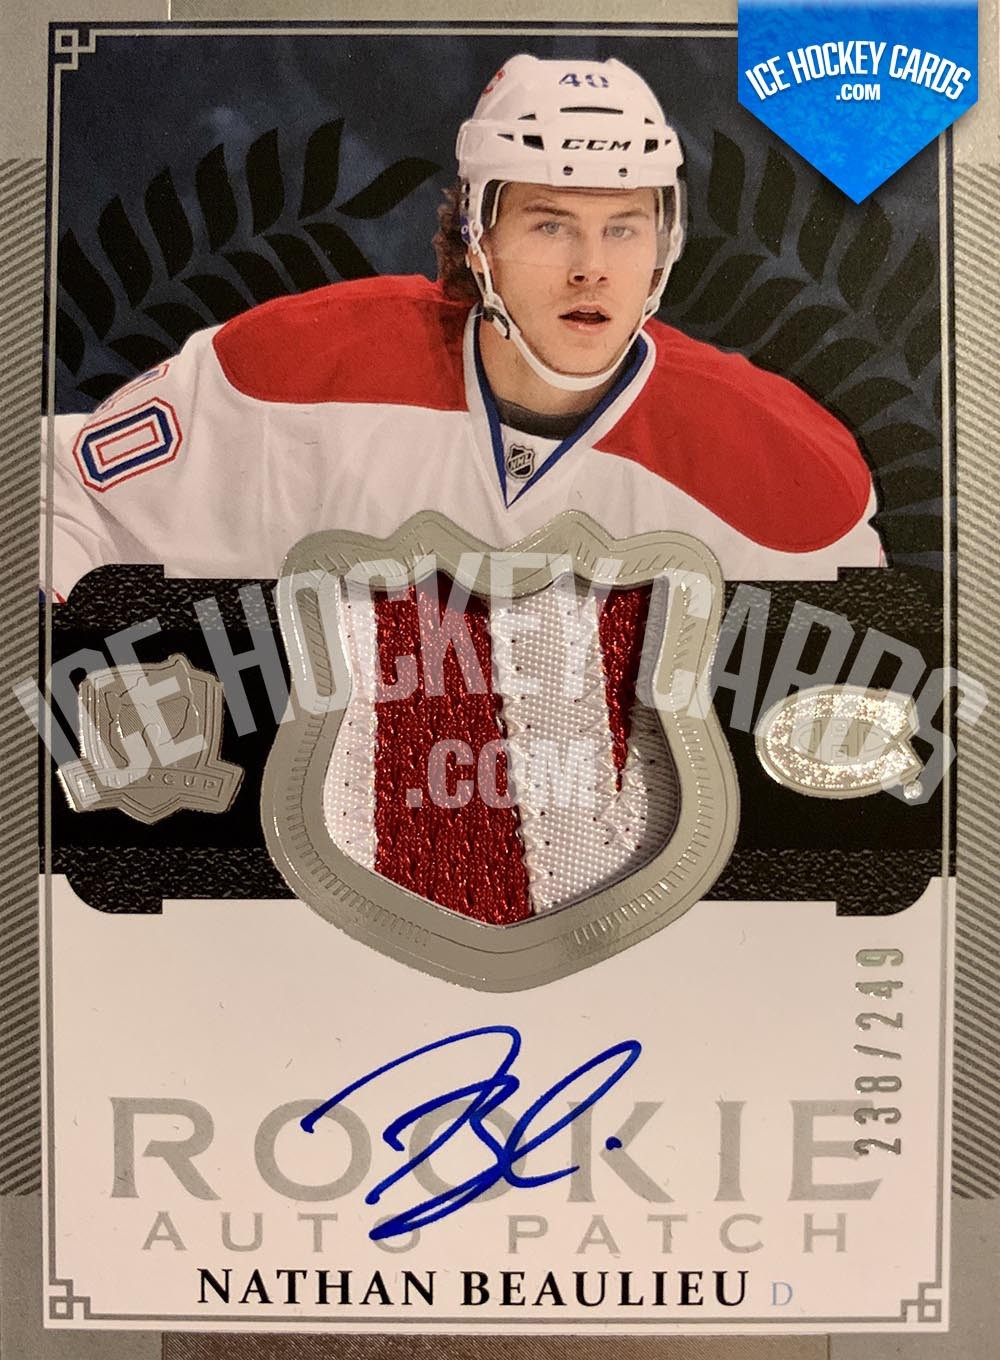 Upper Deck - The Cup 2013-14 - Nathan Beaulieu Rookie Auto Patch RC